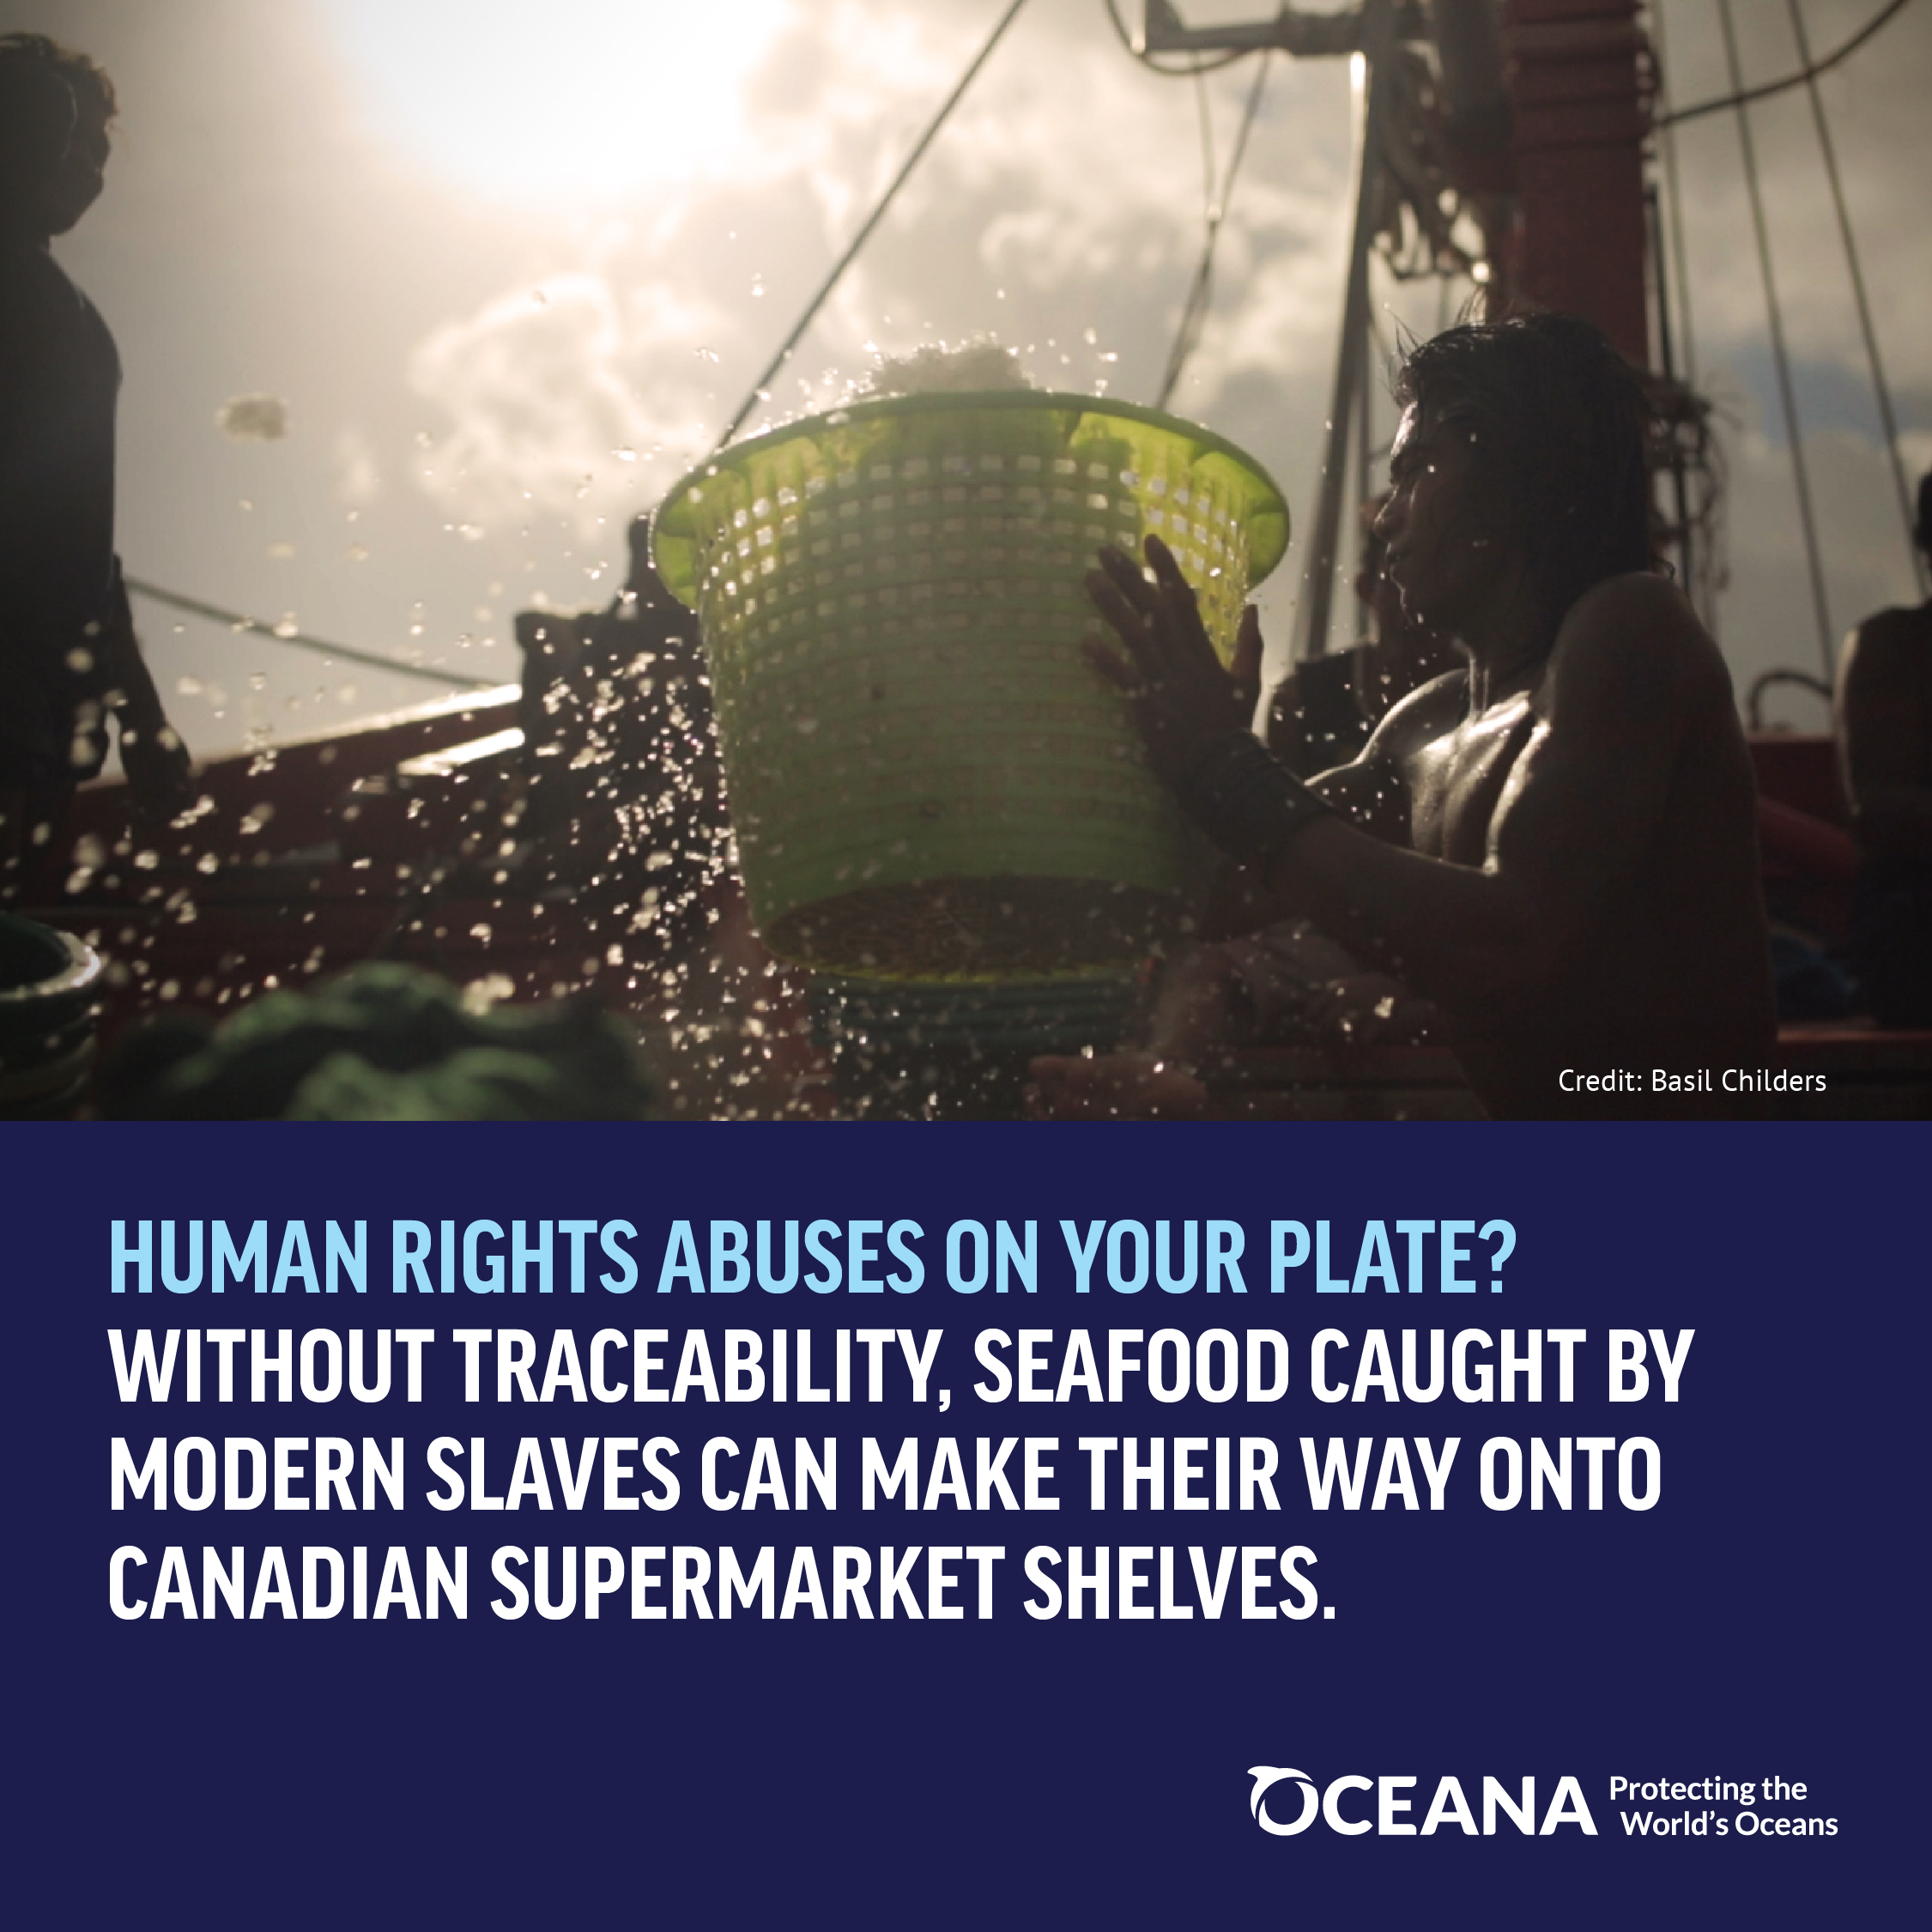 Human rights abuses on your plate?